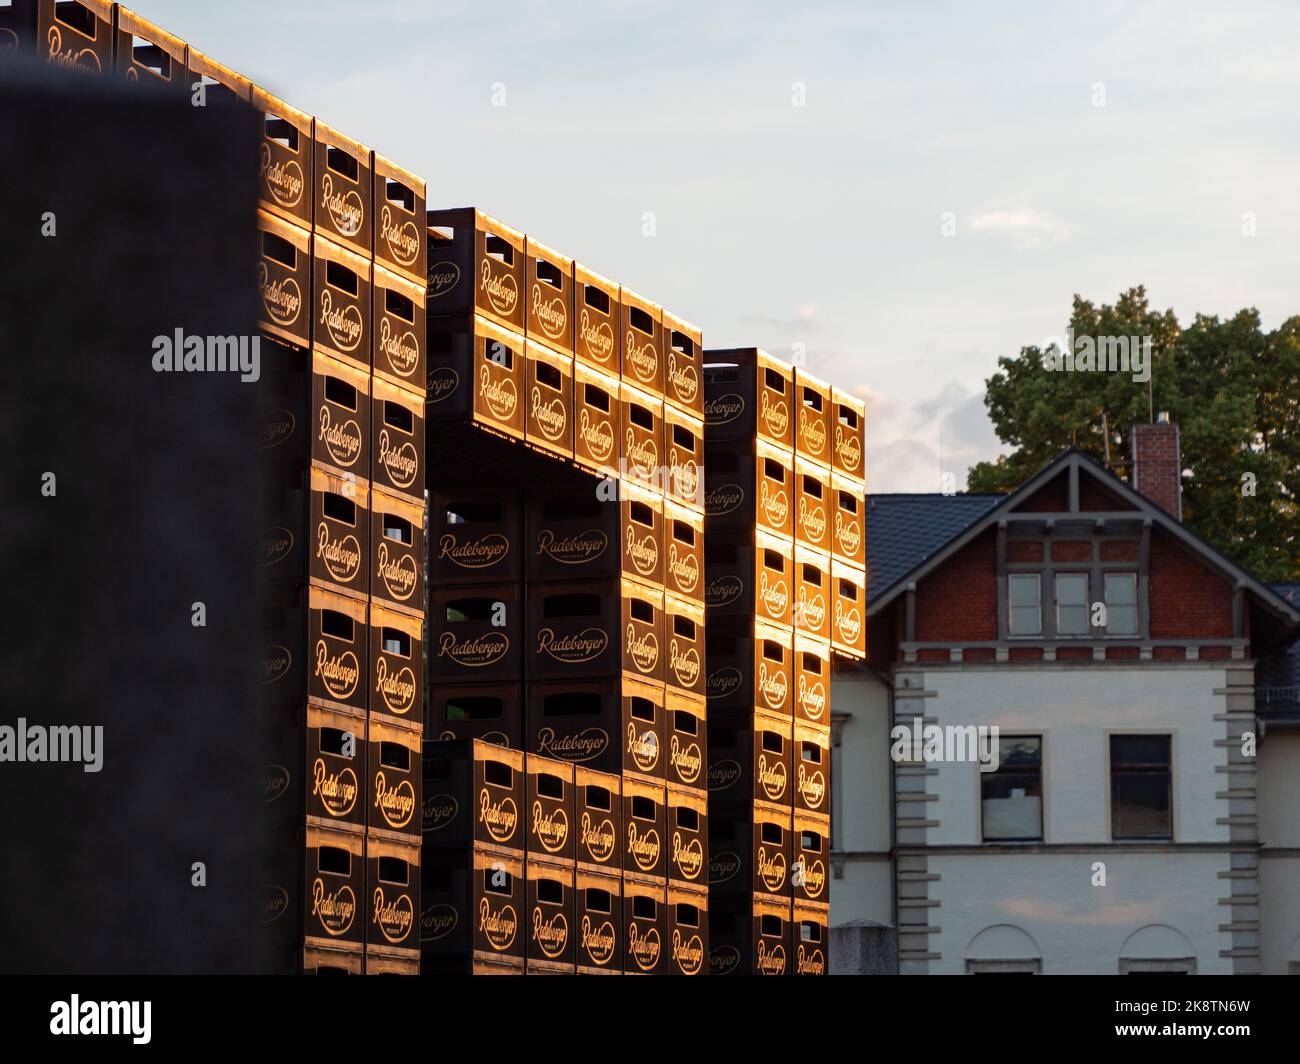 Radeberger pilsner beer crates stacked on top of each other. The golden logos are illuminated by evening sunlight. The crates are at the brewery. Stock Photo